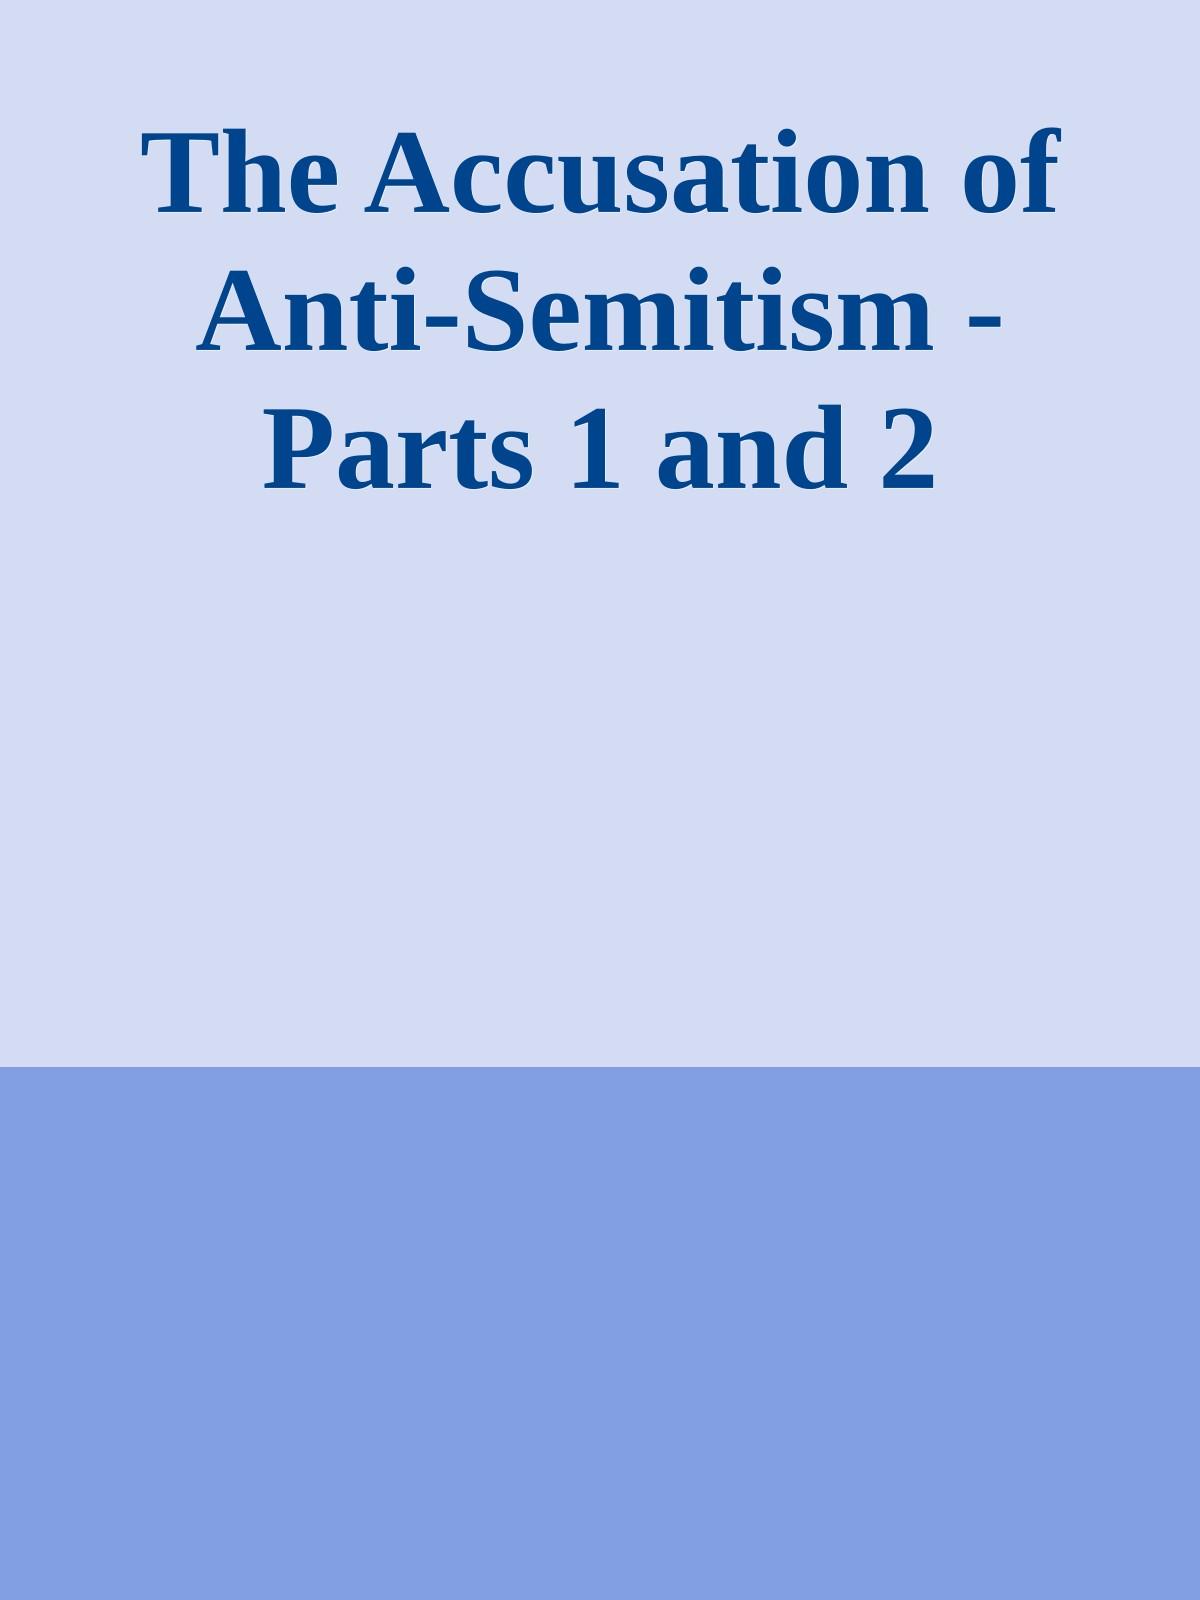 The Accusation of Anti-Semitism - Parts 1 and 2